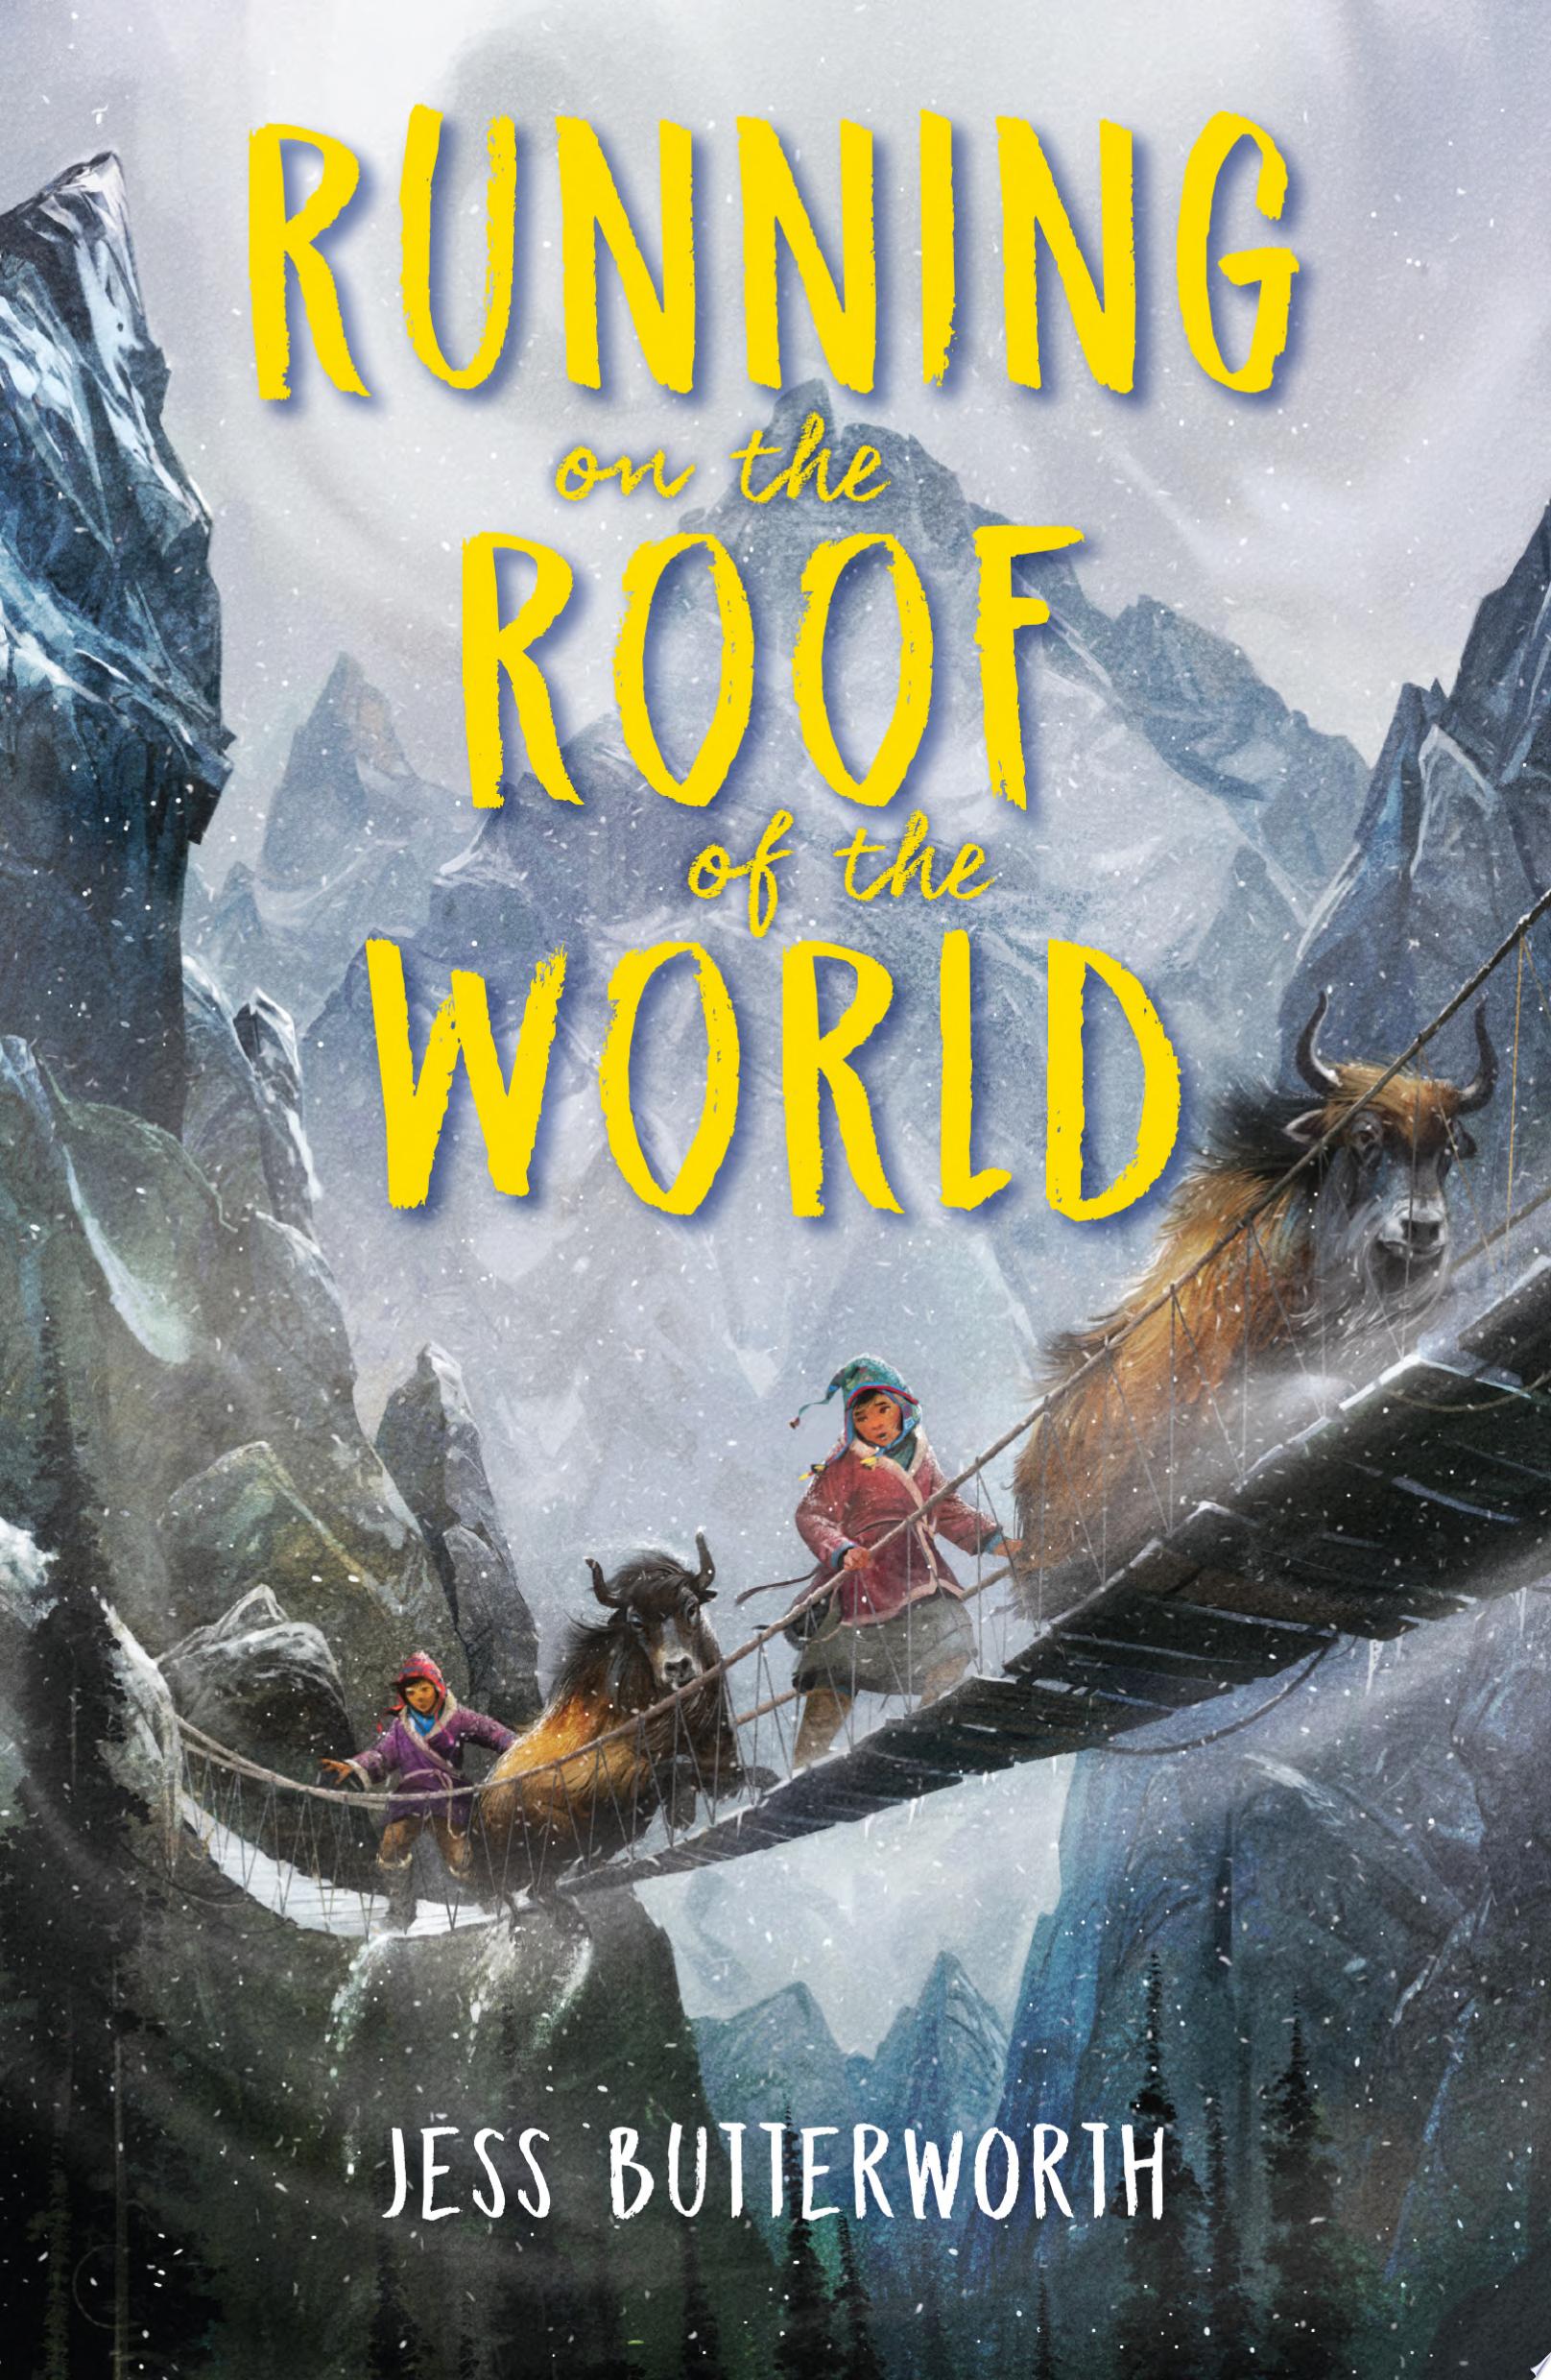 Image for "Running on the Roof of the World"